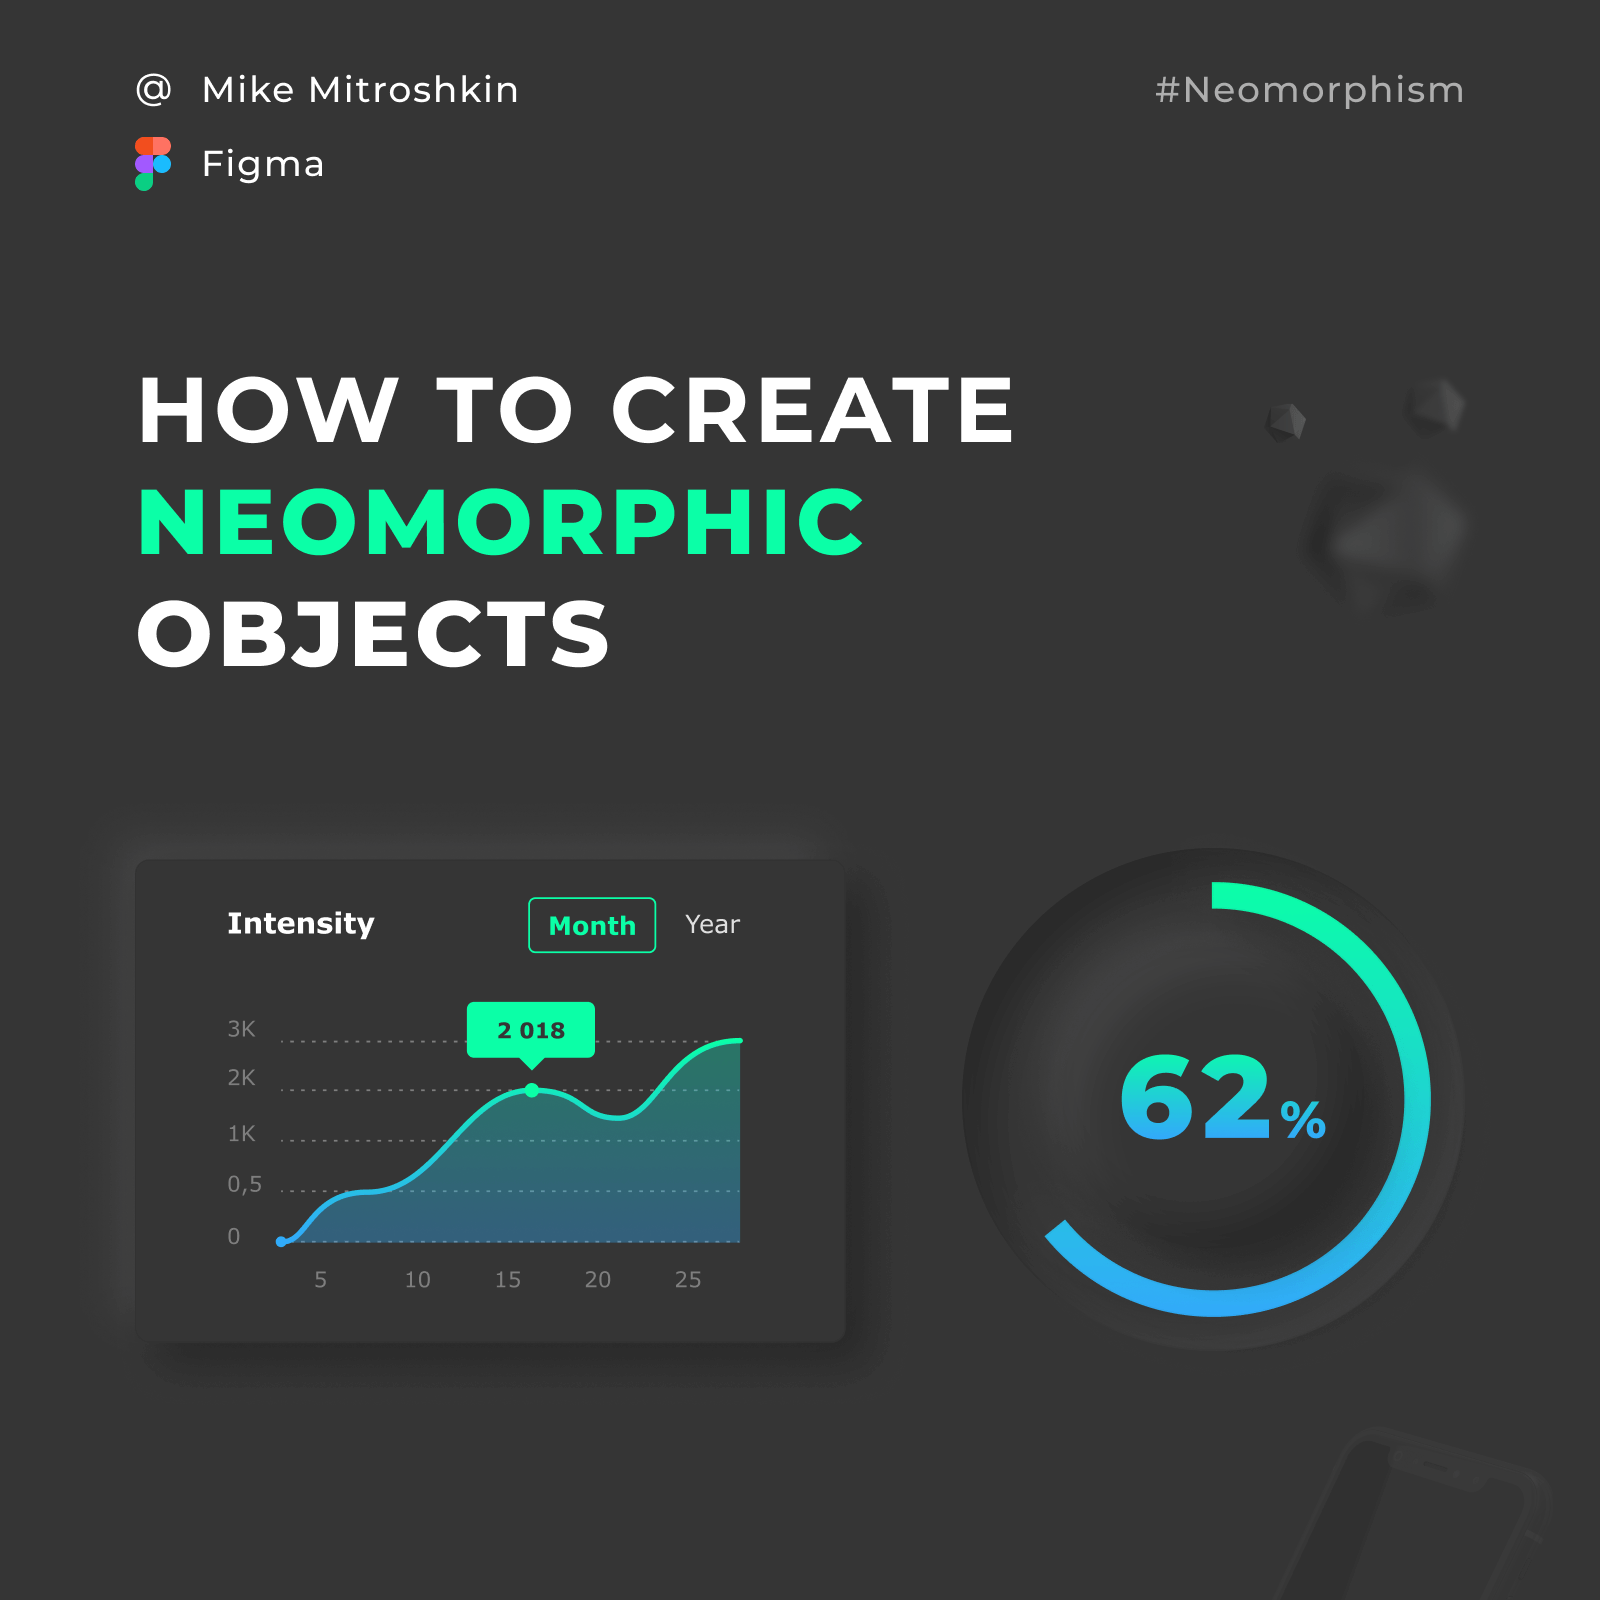 How to create neomorphic objects